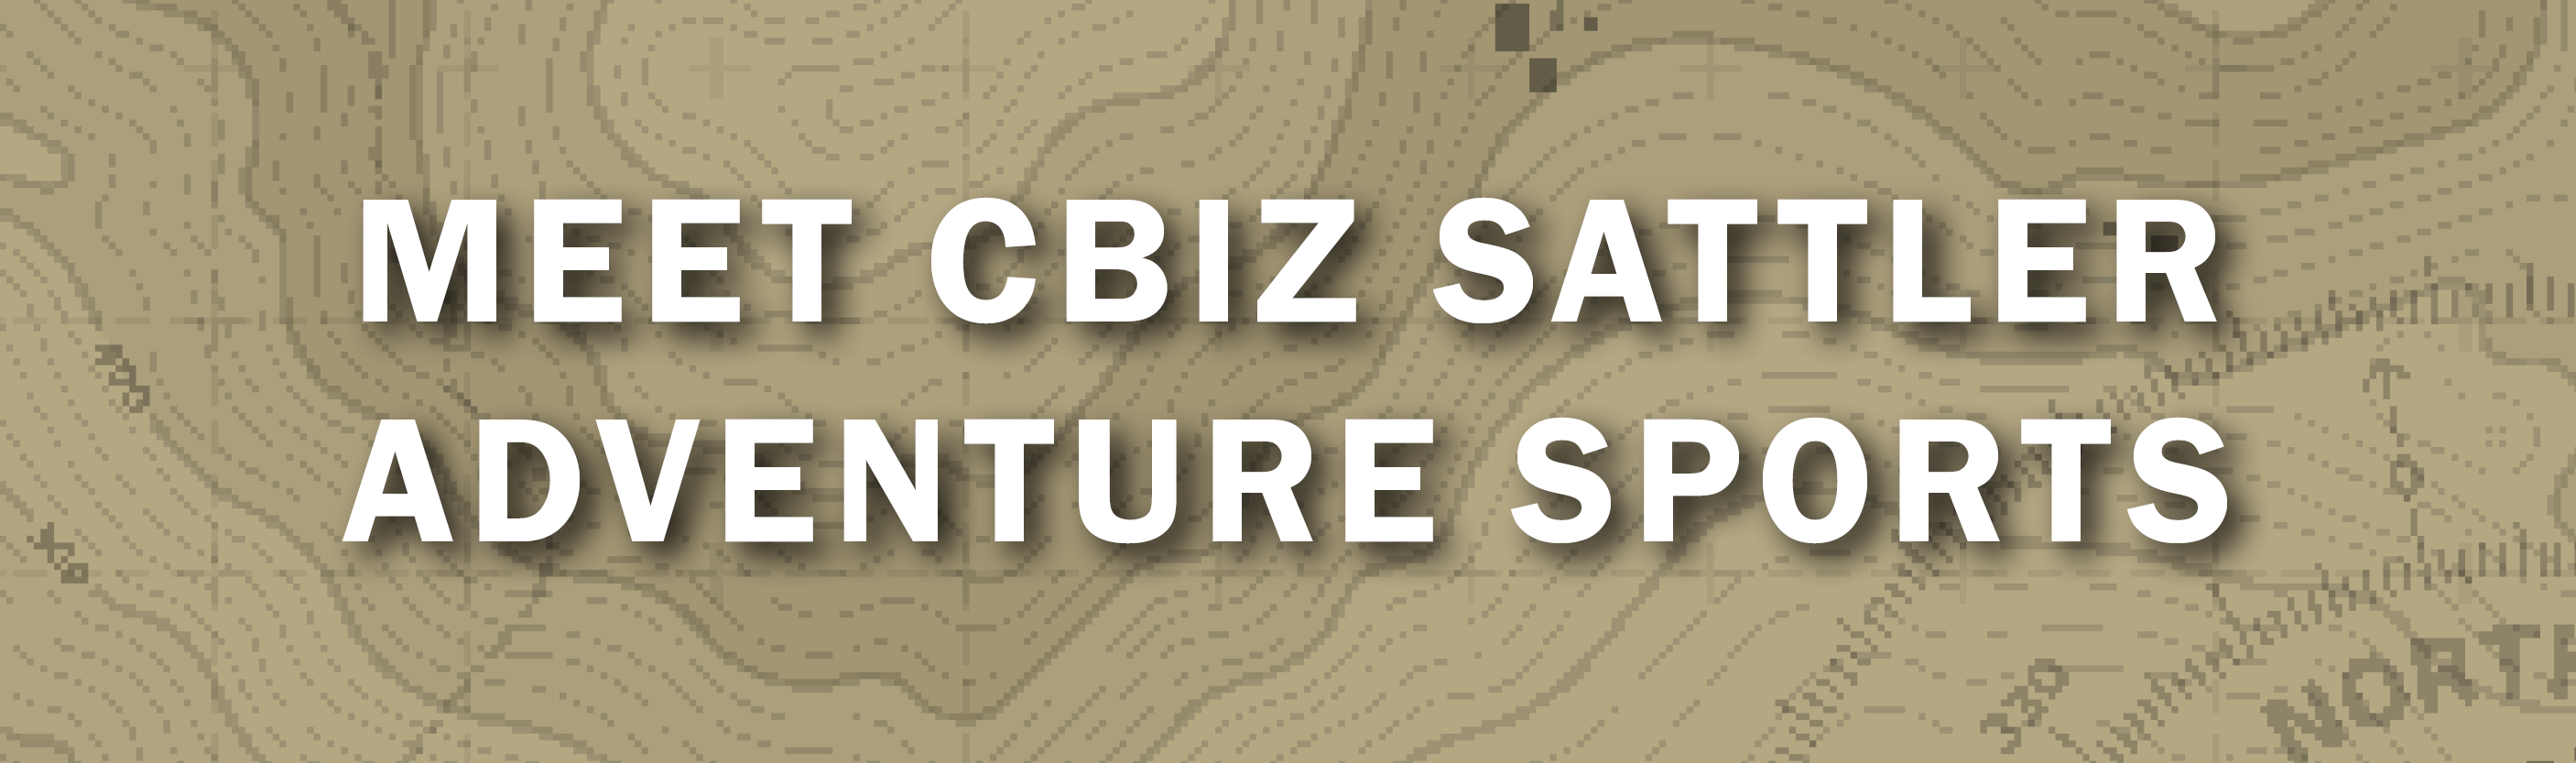 brown map with text overlay that says meet cbiz sattler adventure sports